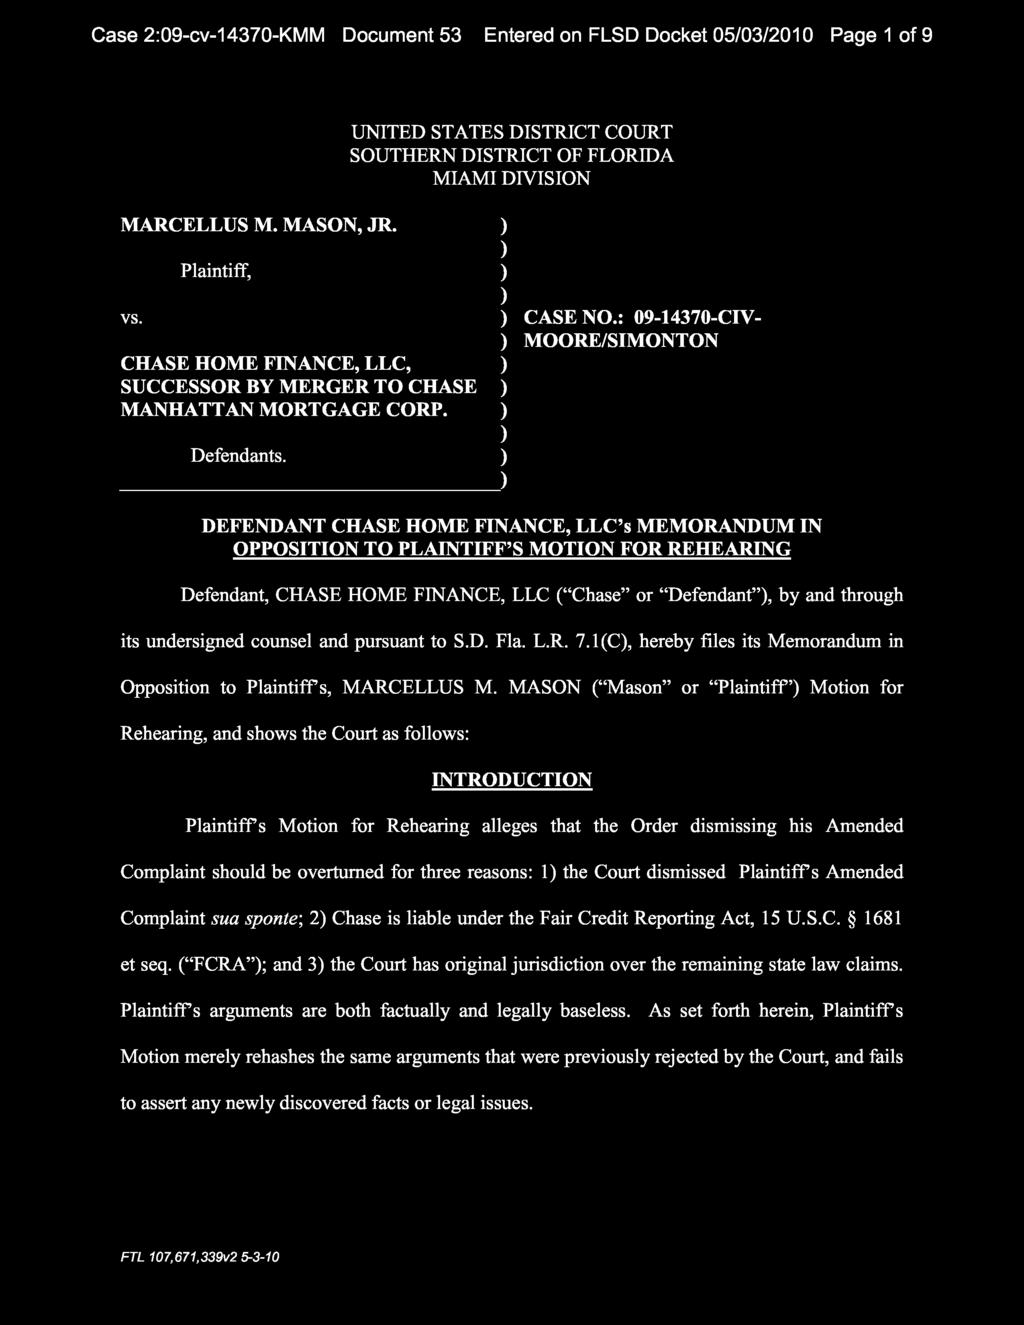 DEFENDANT CHASE HOME FINANCE, LLC's MEMORANDUM IN OPPOSITION TO PLAINTIFF'S MOTION FOR REHEARING Defendant, CHASE HOME FINANCE, LLC ("Chase" or "Defendant", by and through its undersigned counsel and